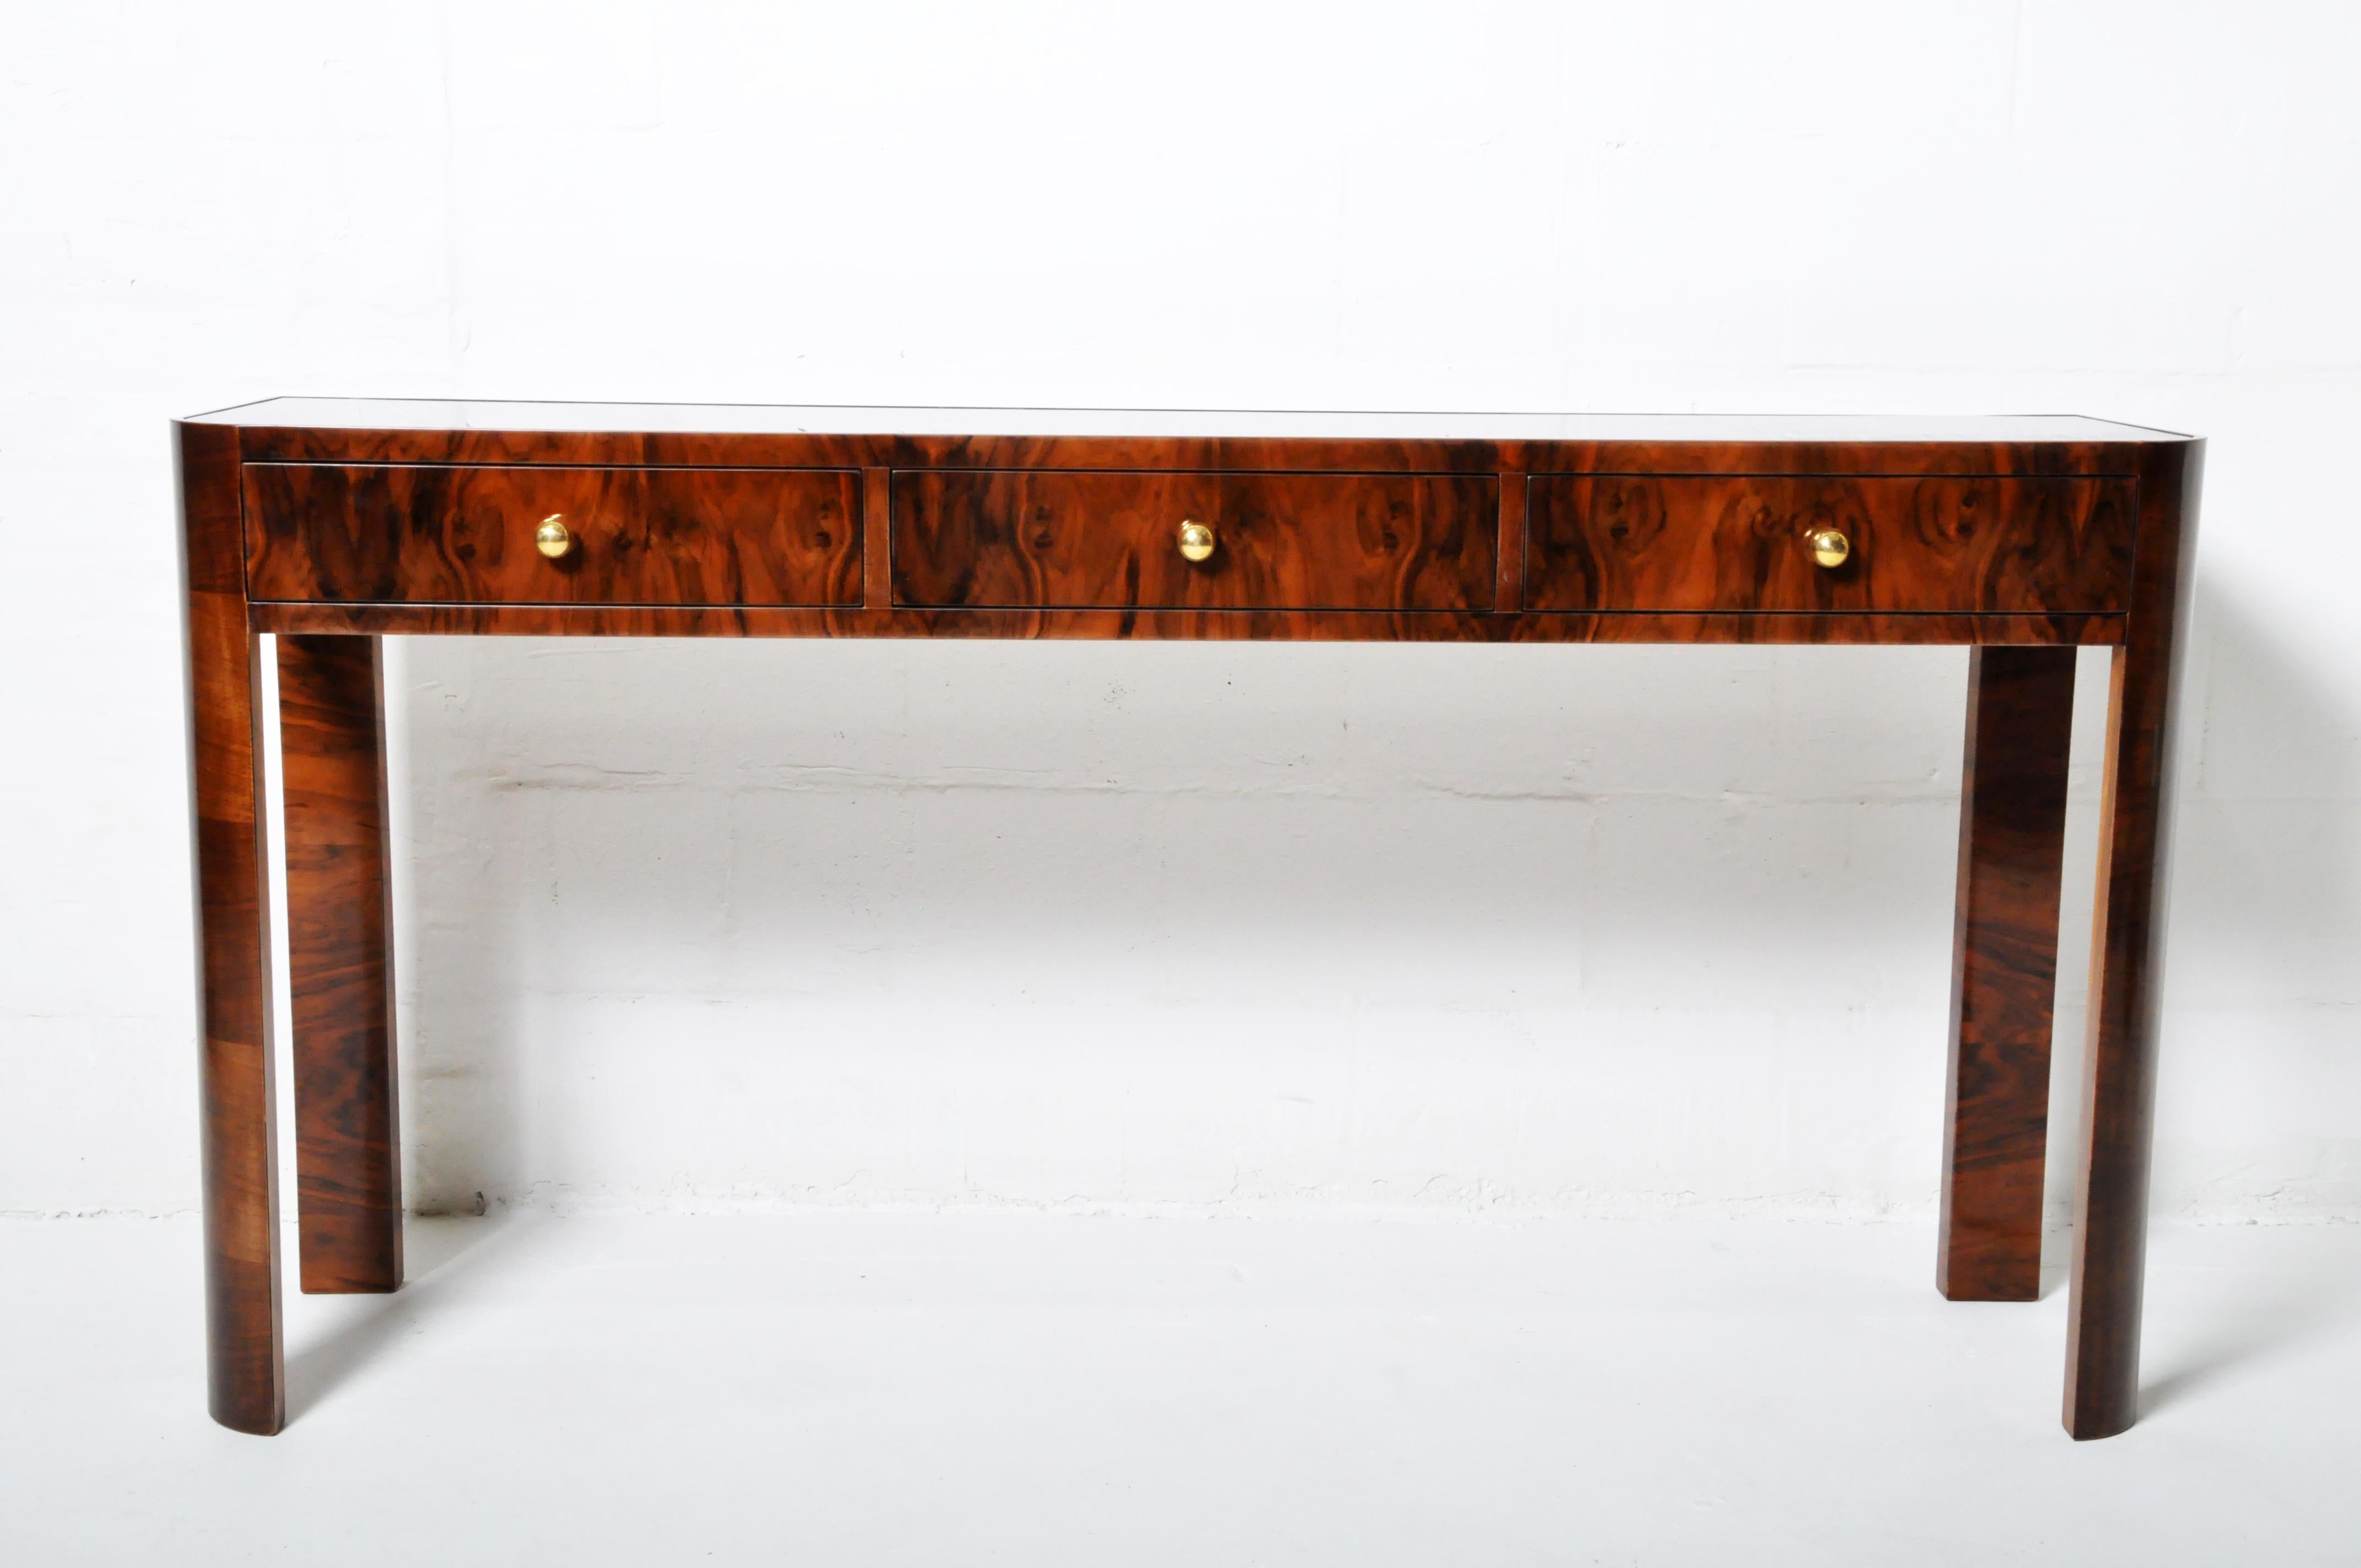 A classic Hungarian Art deco console table with three drawers, walnut veneer and a black glass top. Large round brass knobs add visual interest. Hungarian Art Deco is very similar to French art Deco but tends to be simpler and employs fewer exotic